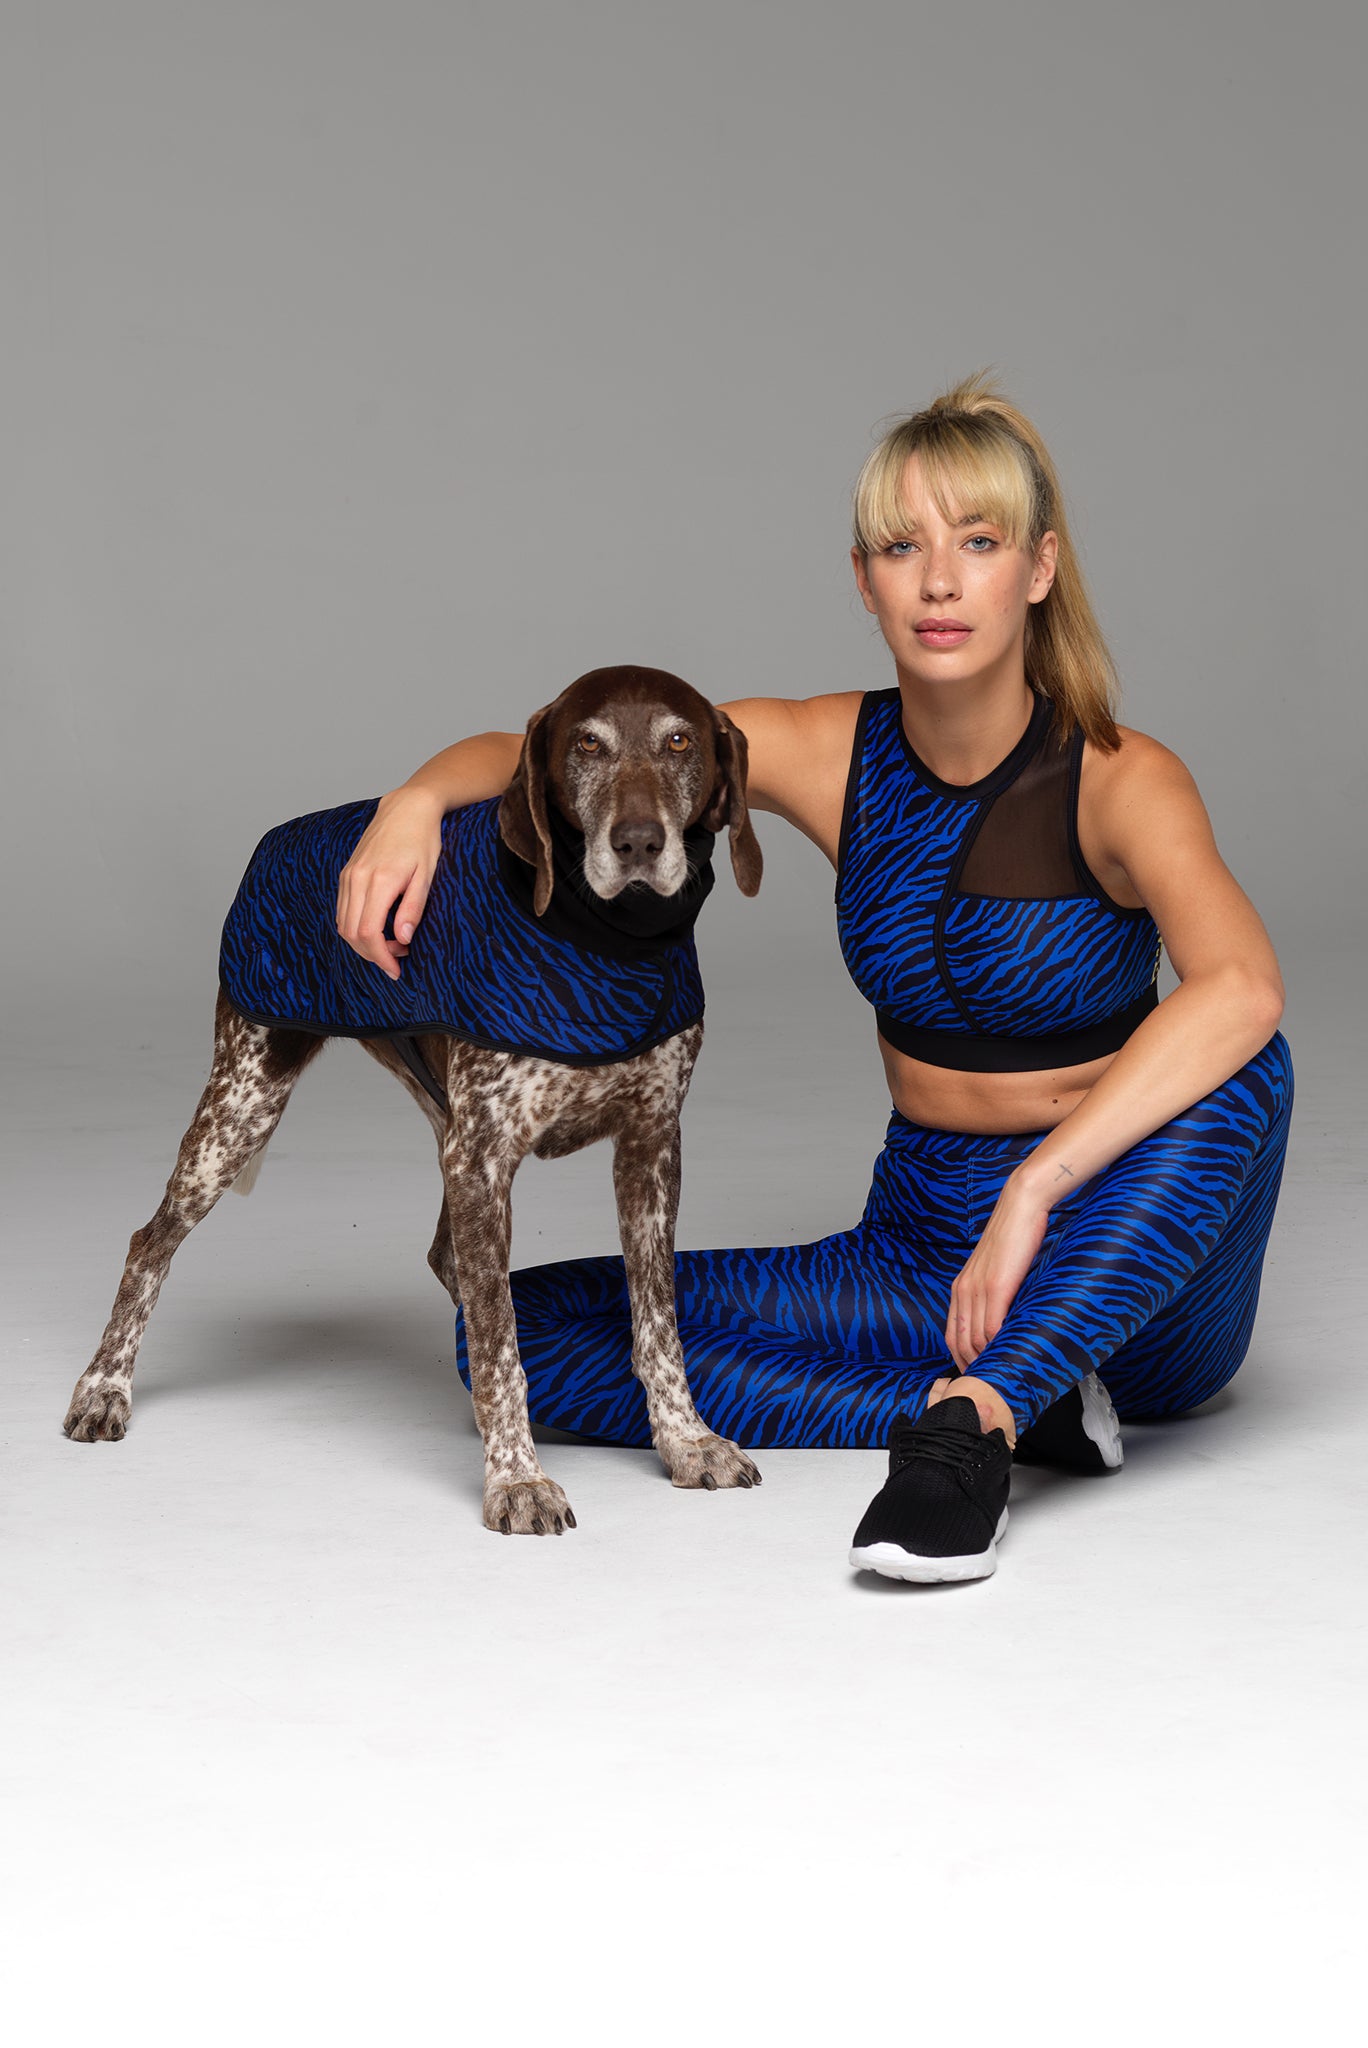 Fancy a bit of matchy-matchy? Model & Dog shown in matching Blue Zebra print outfits.